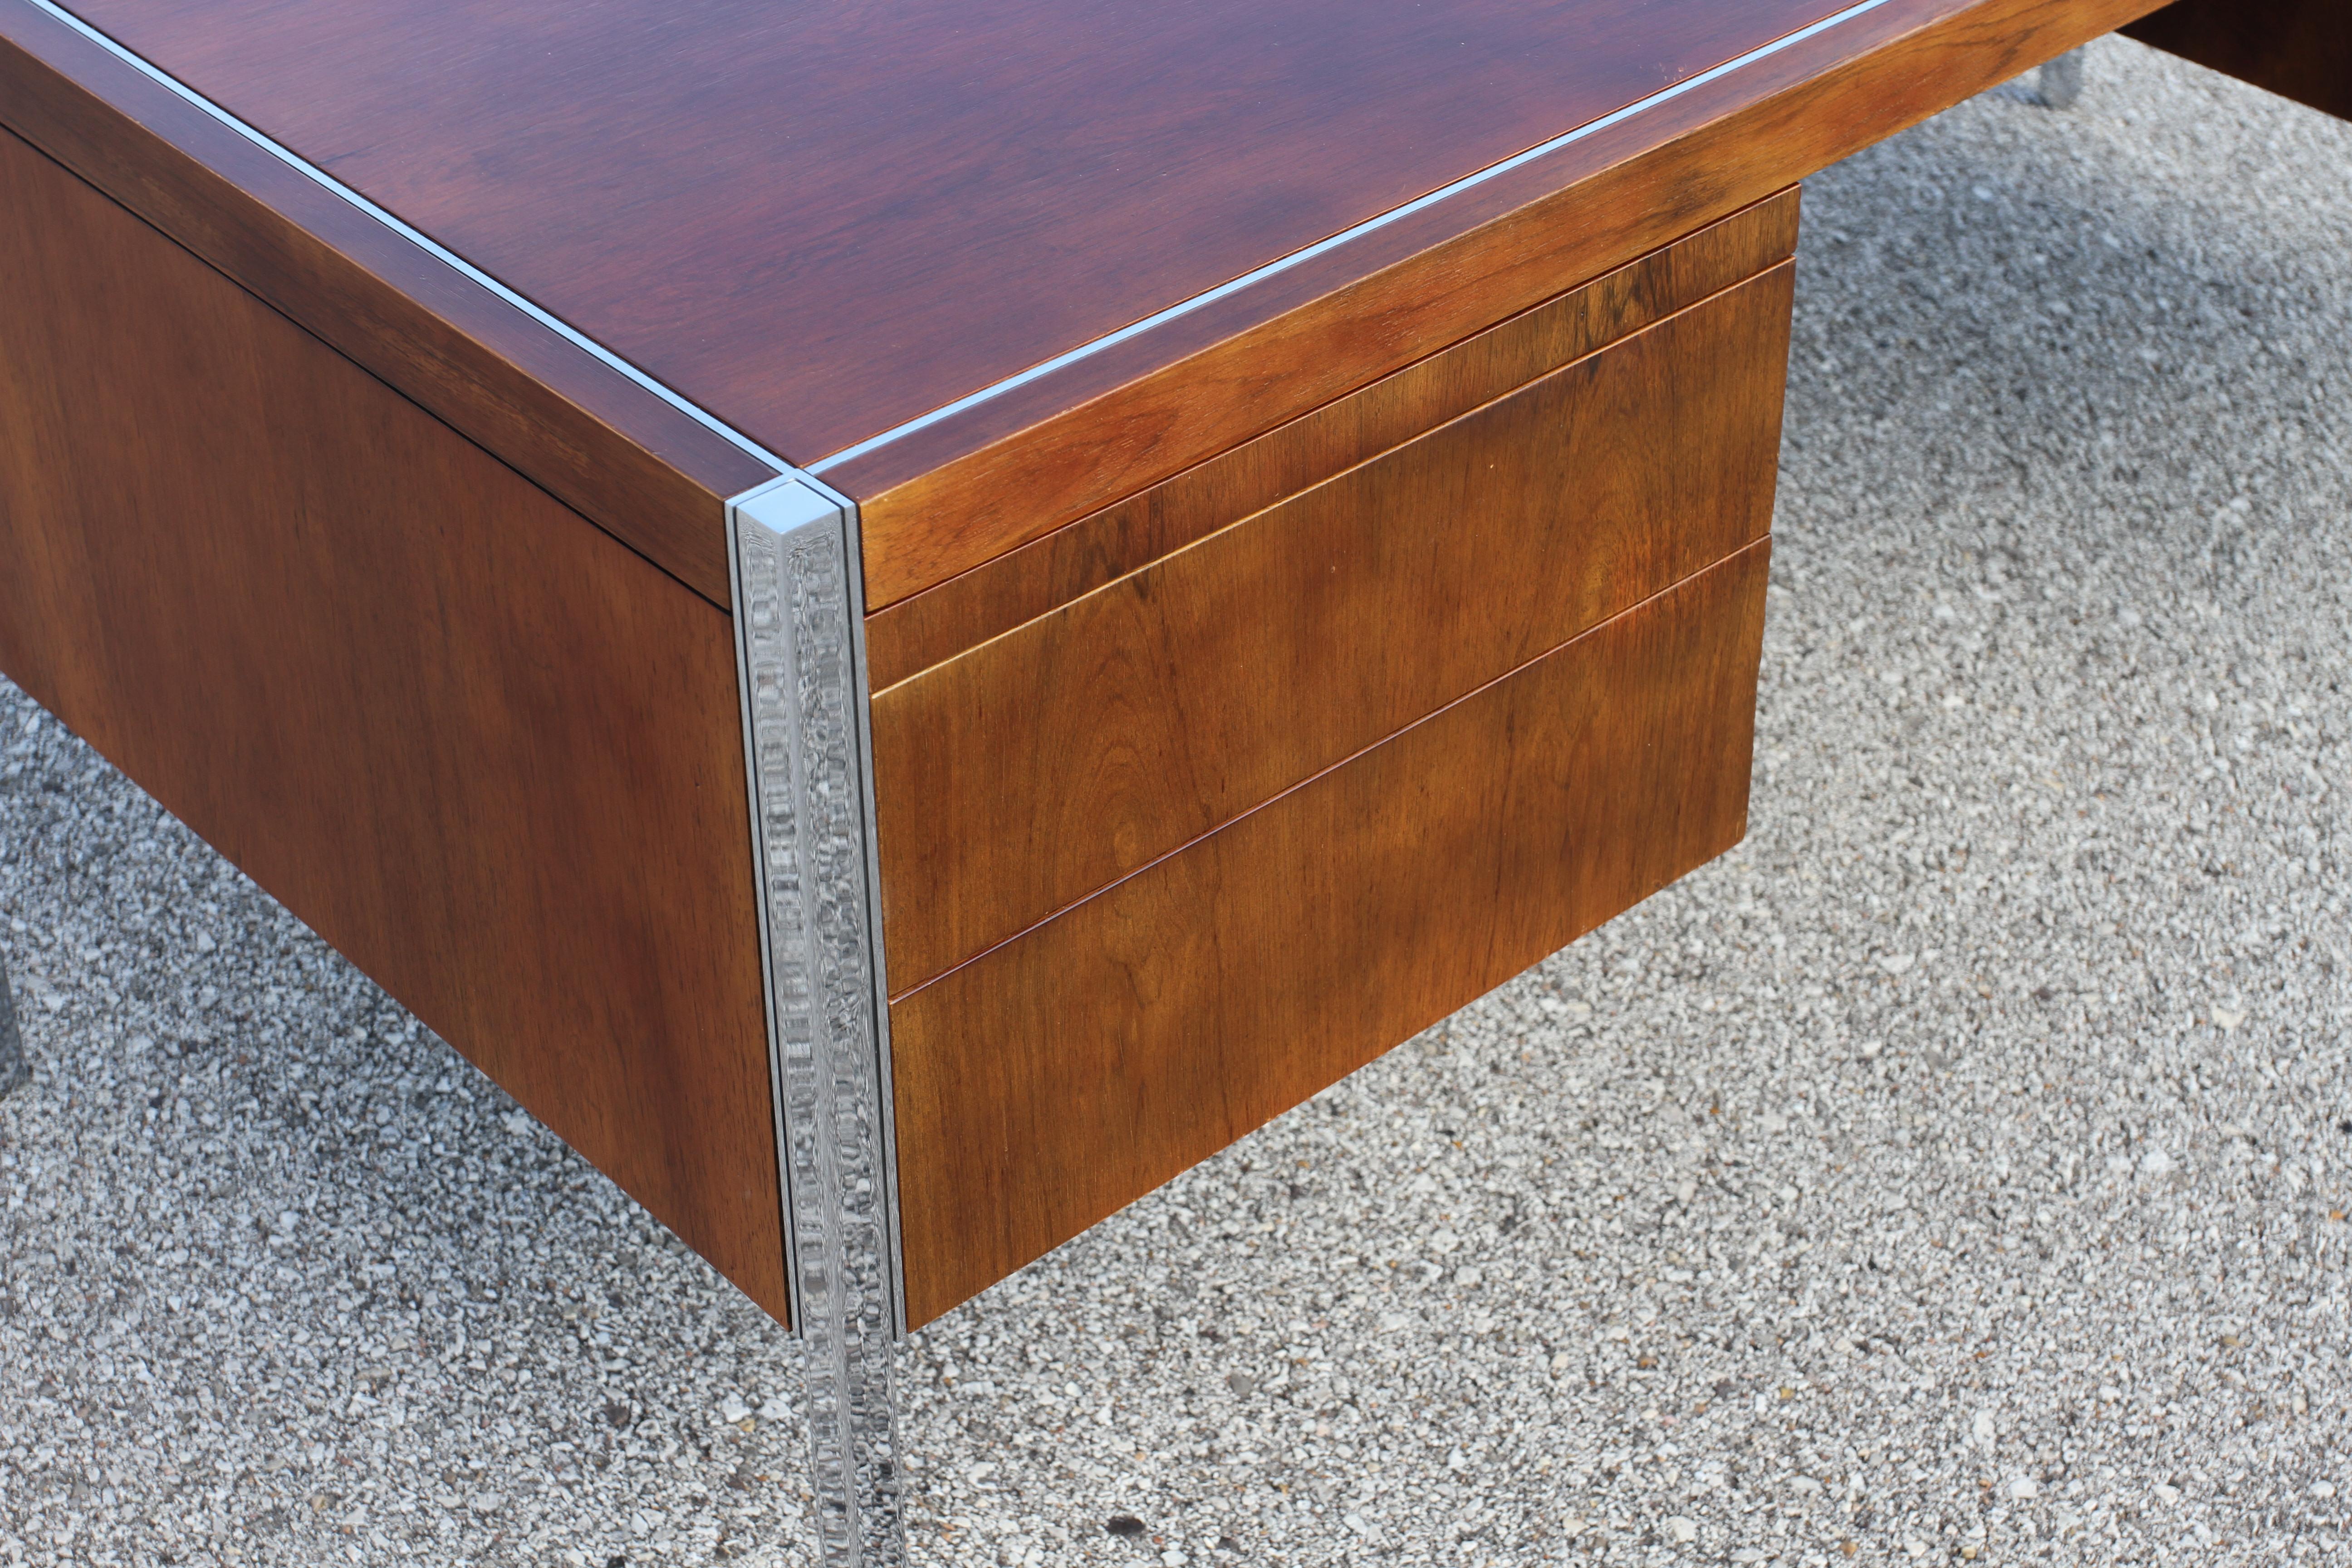 Richard Schultz for Knoll 1960s Mid-Century Modern Rosewood Executive Desk #4146 For Sale 1